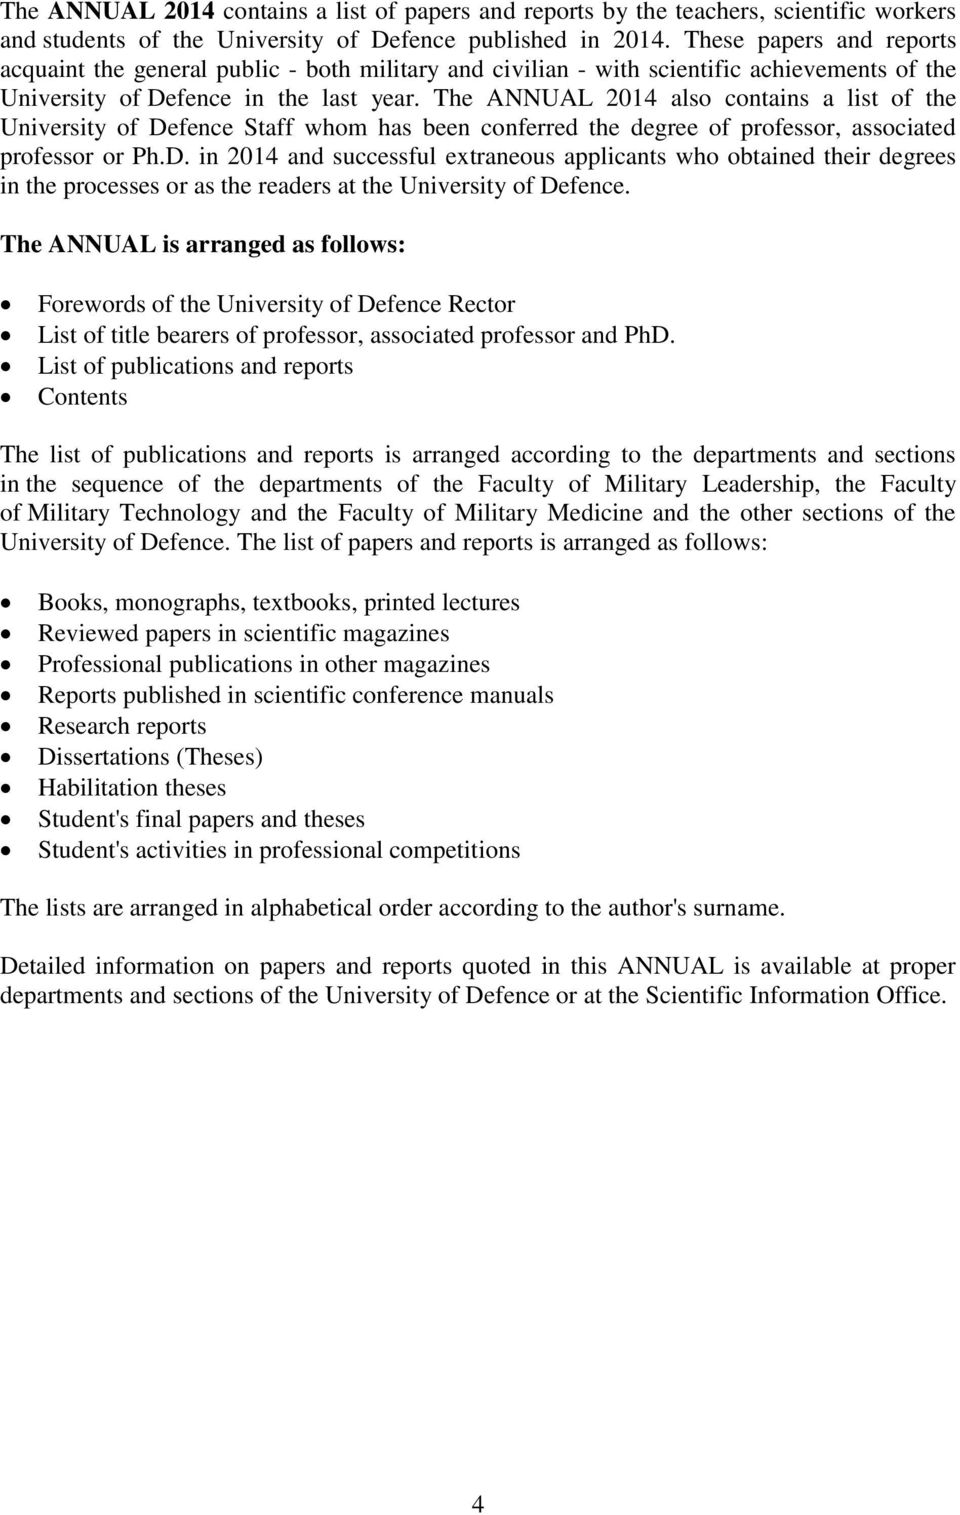 The ANNUAL 2014 also contains a list of the University of Defence Staff whom has been conferred the degree of professor, associated professor or Ph.D. in 2014 and successful extraneous applicants who obtained their degrees in the processes or as the readers at the University of Defence.